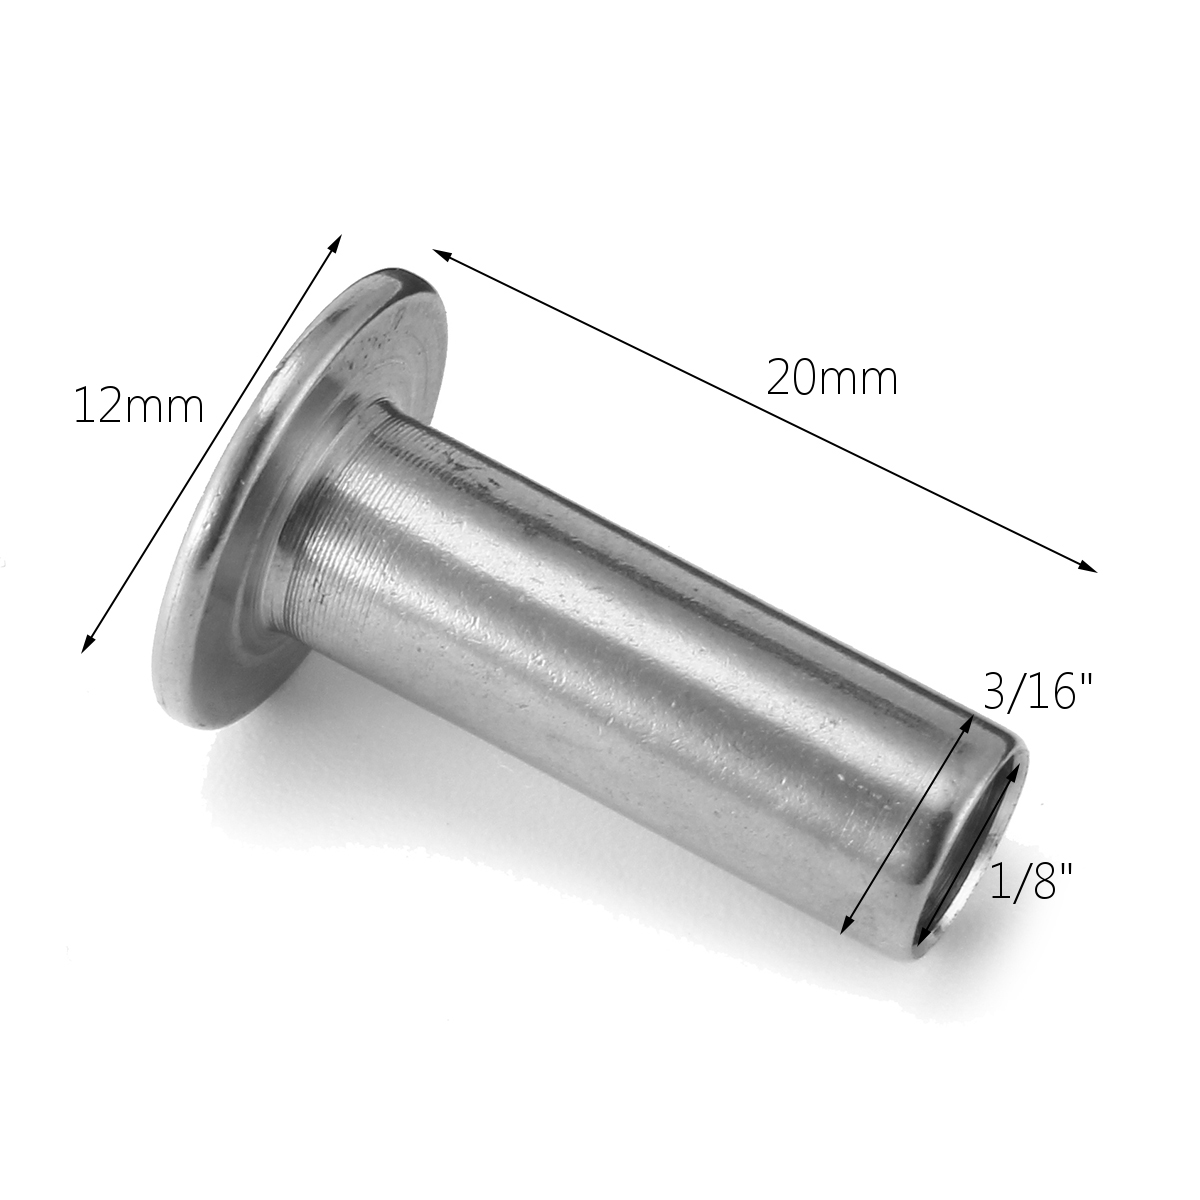 10X T316 Stainless Steel Protective Protector Sleeve for 1/8